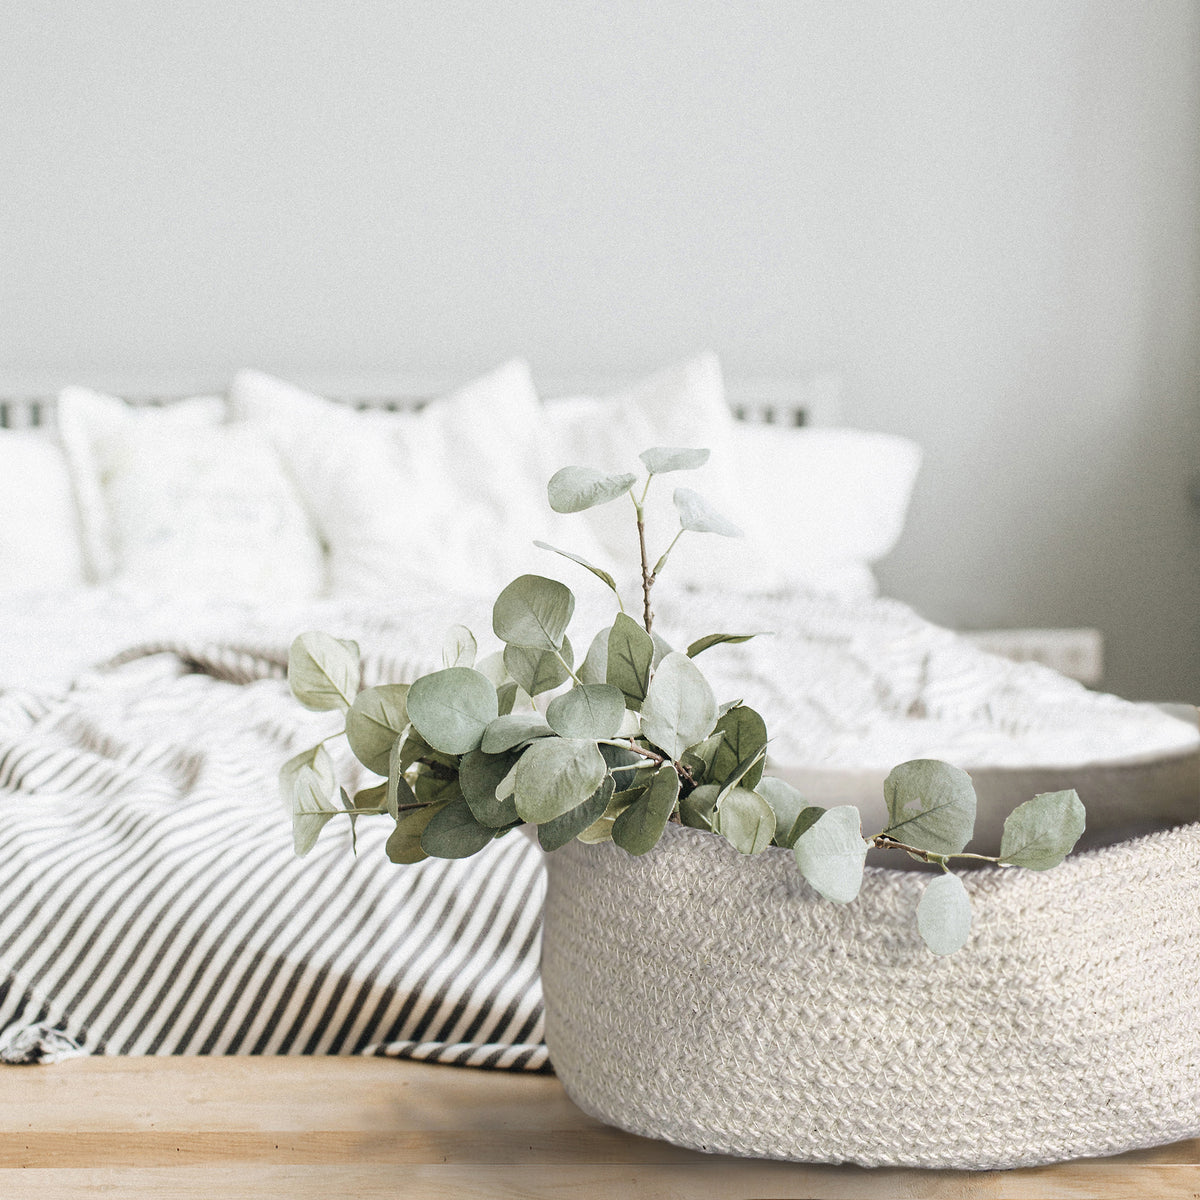 Fern small woven cotton basket holding leaves, bedspread in the background